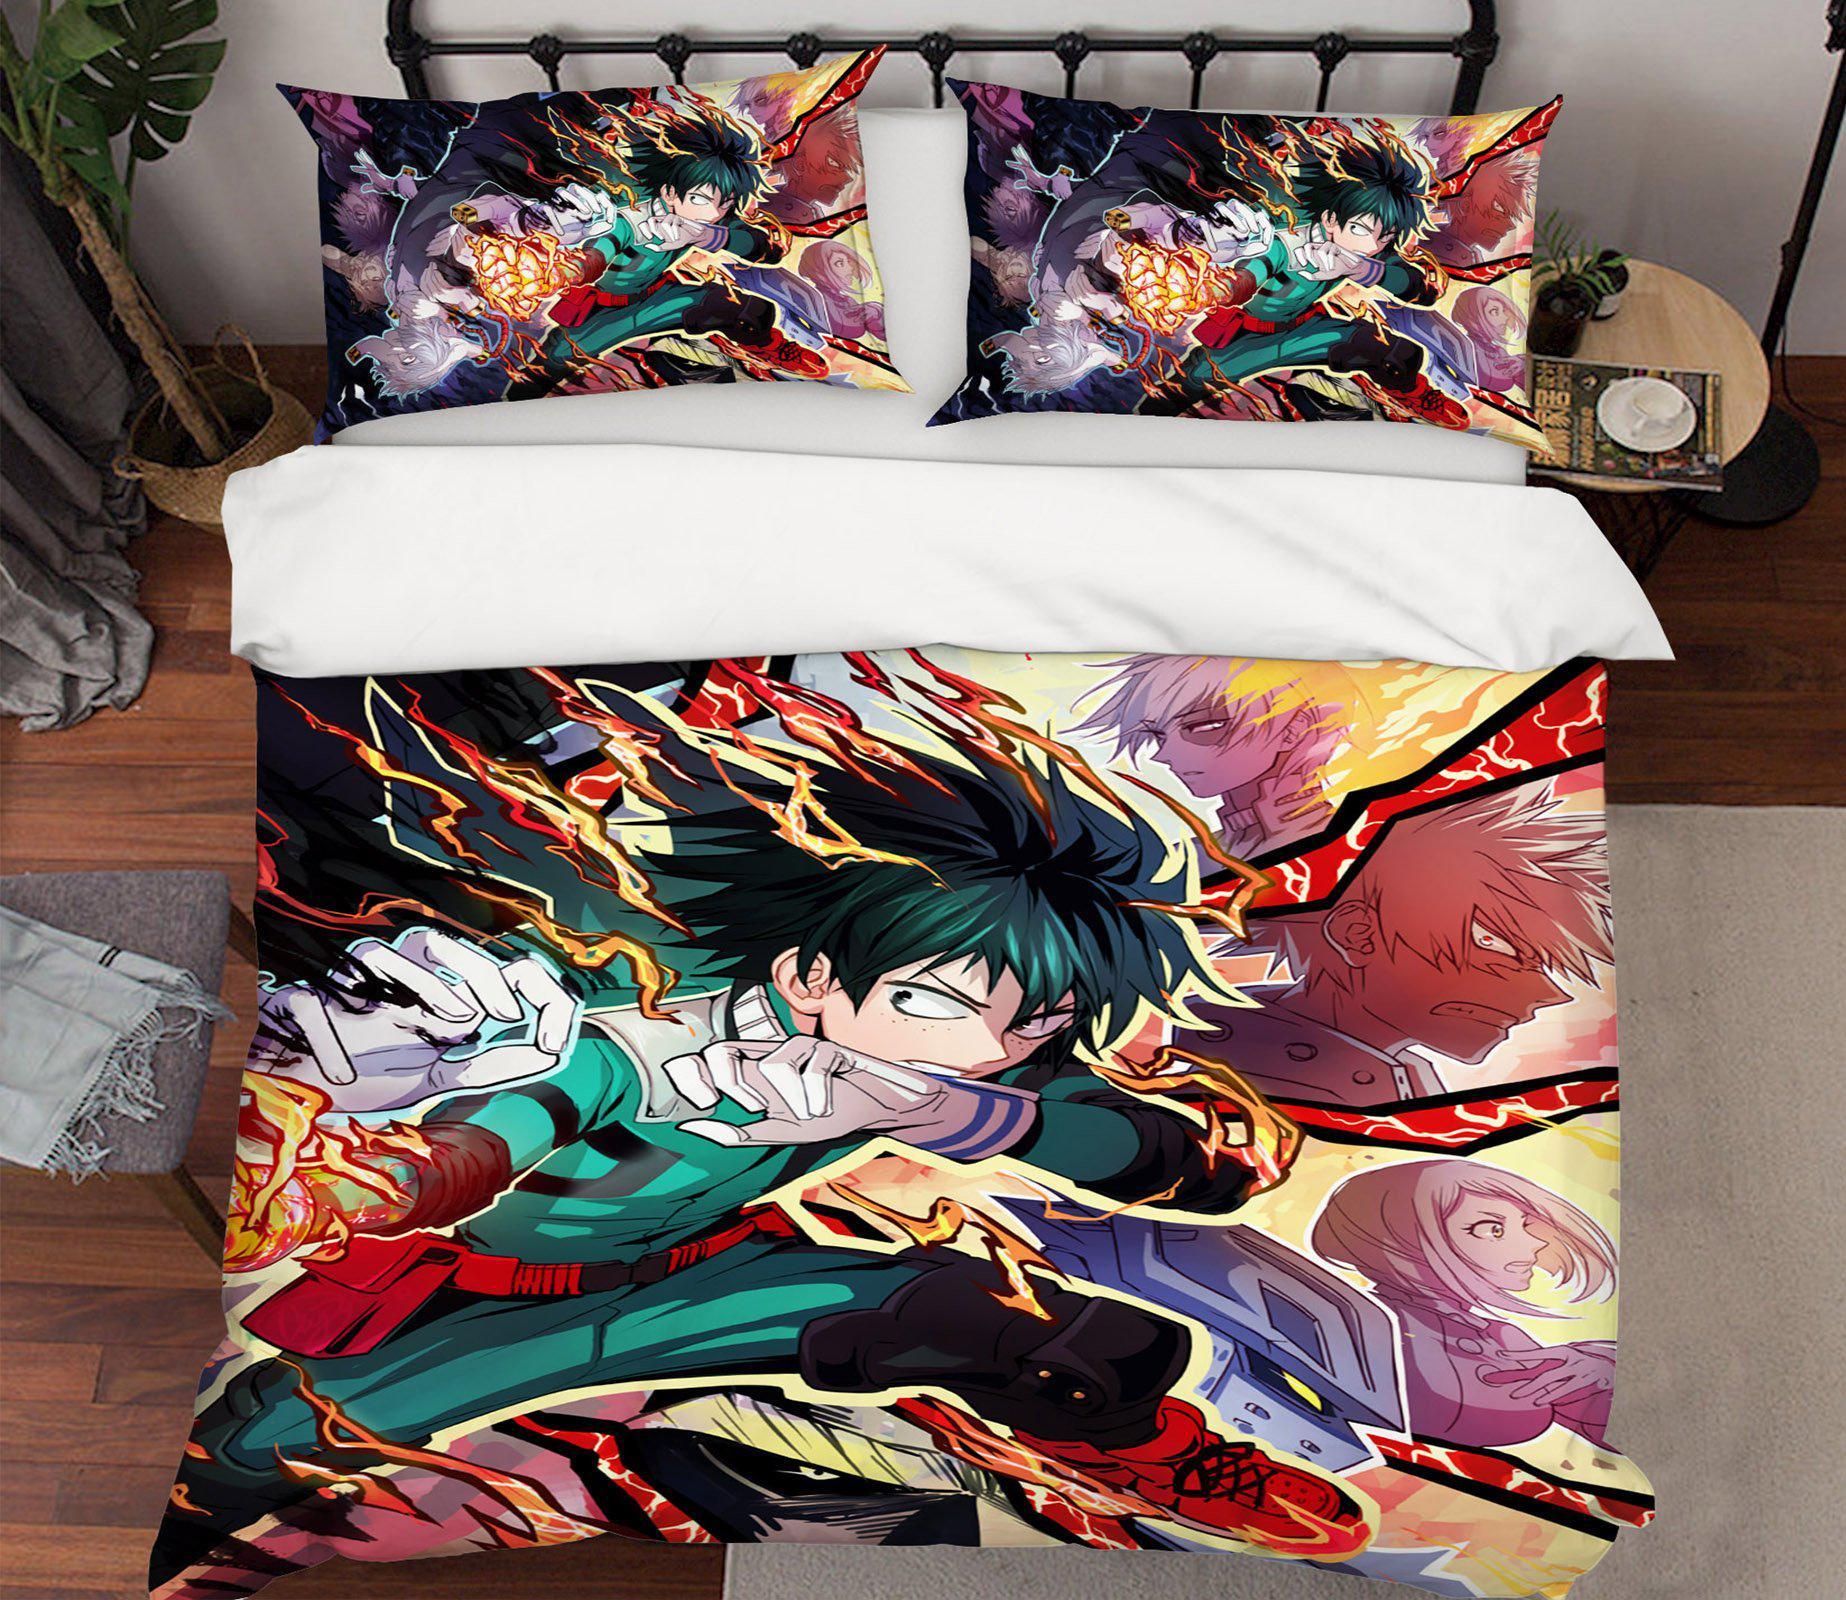 3D Bed Pillowcases Quilt My Hero Academia 21086 Anime Quilt Cover Set Bedding Set Pillowcases 3D Bed Pillowcases Quilt Duvet cover